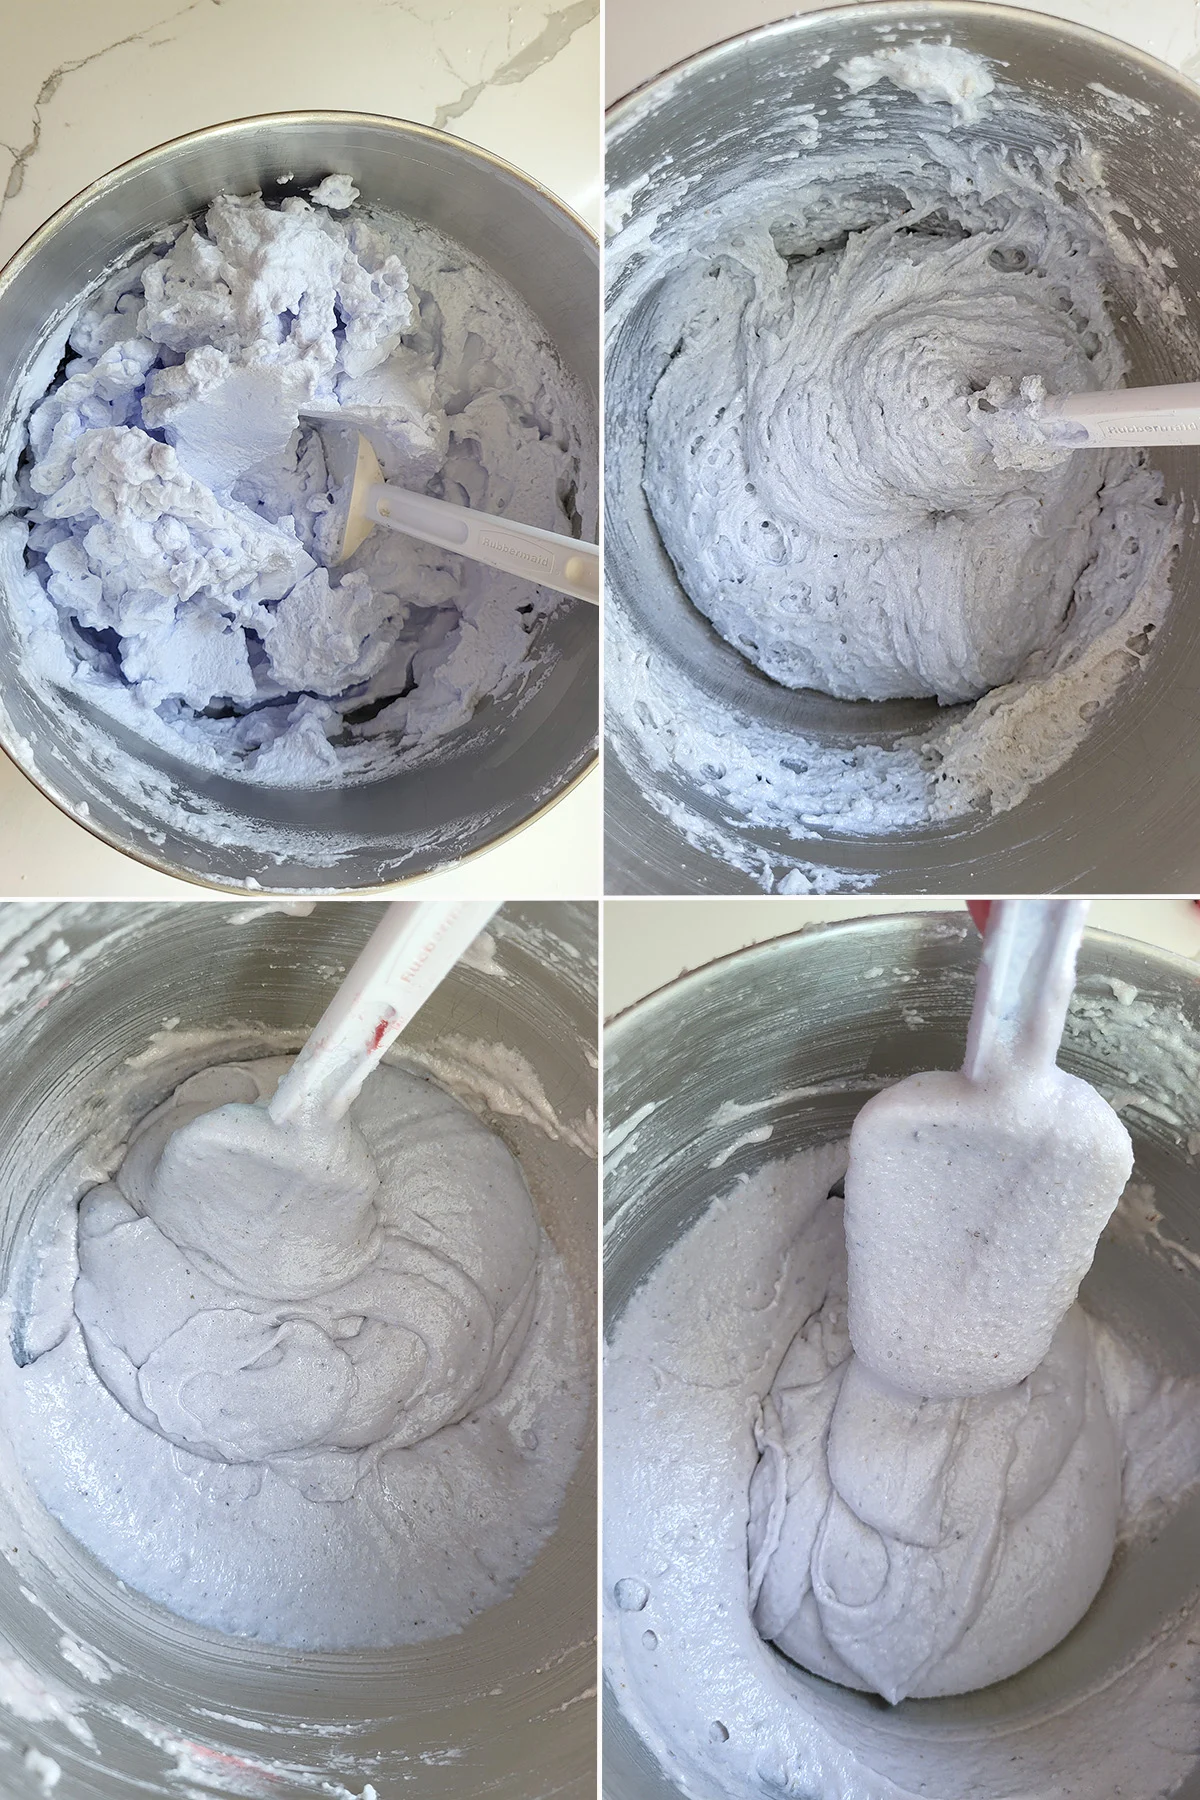 Four bowl showing stages of mixing lavender macaron batter.